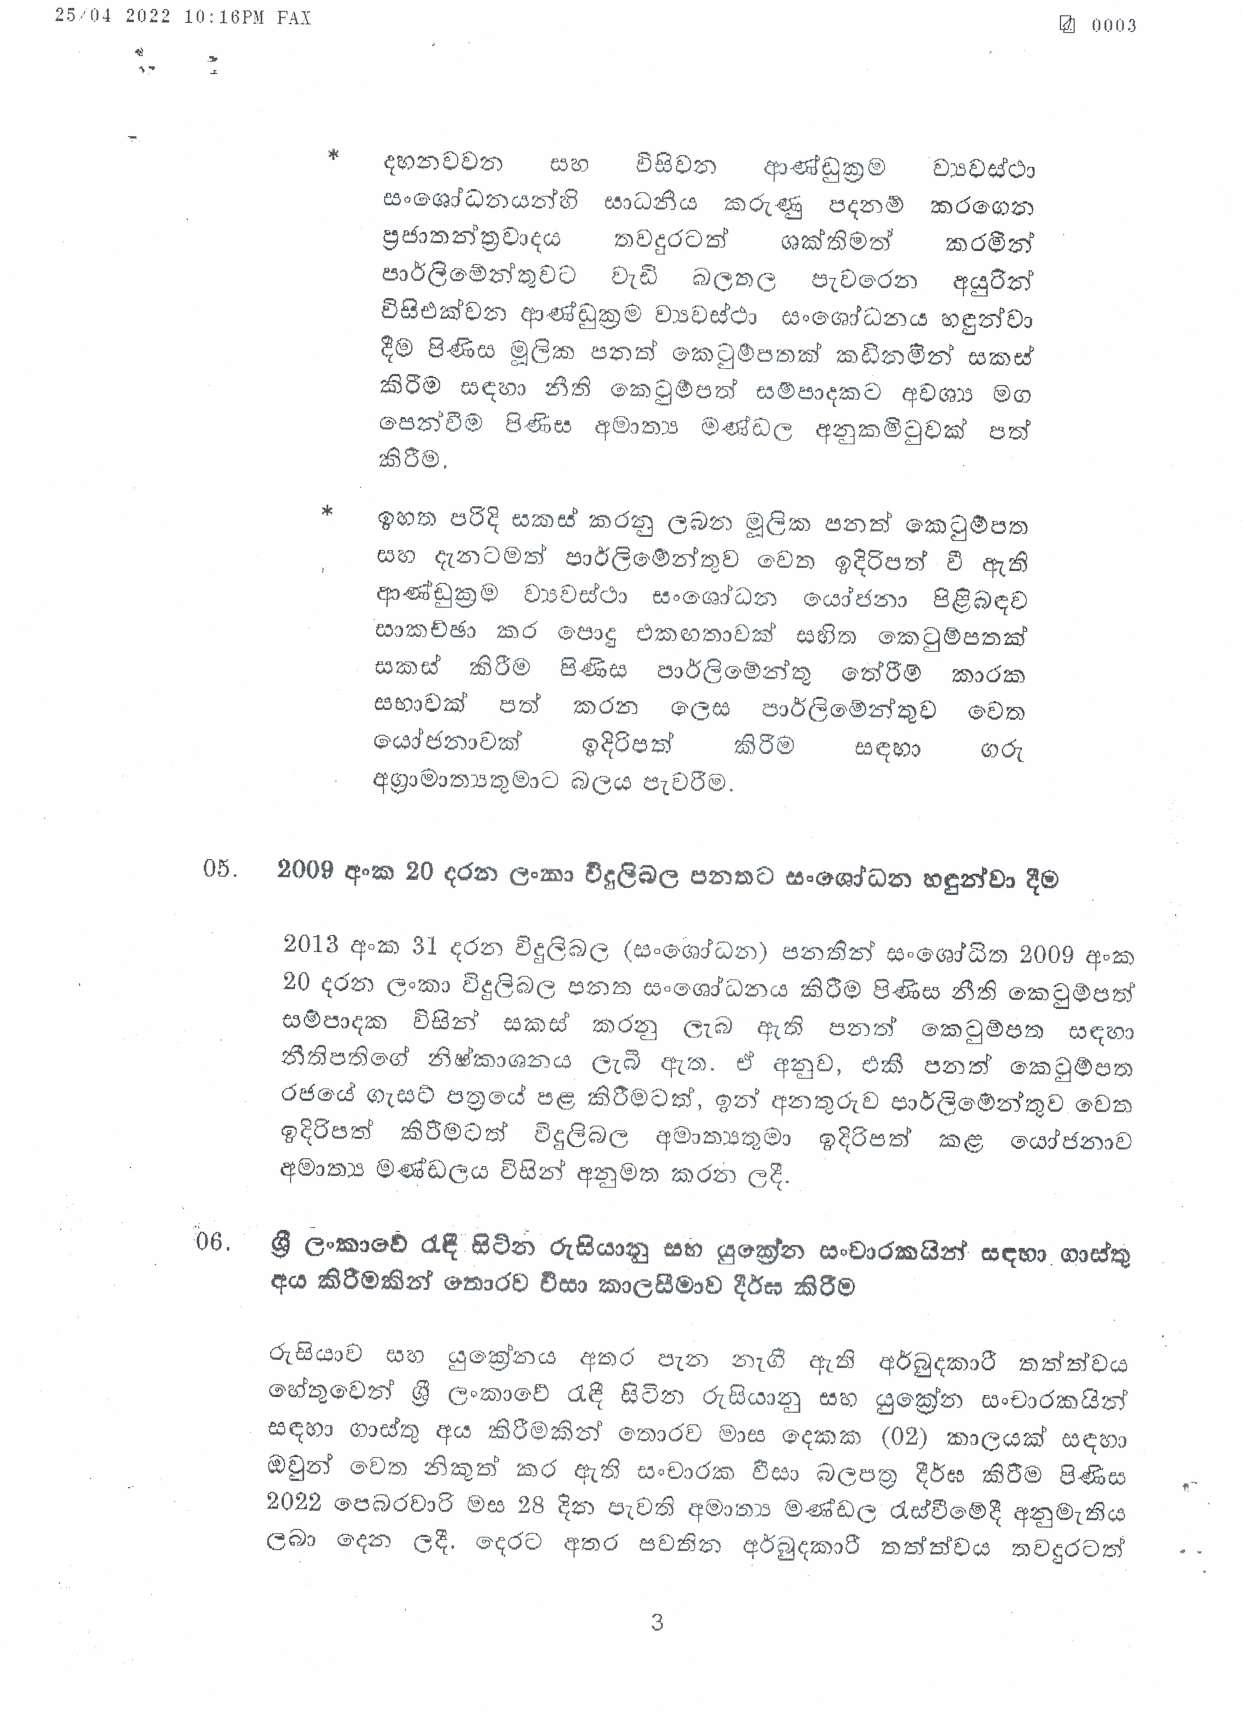 Cabinet Press Breifing on 25.04.2022 page 003